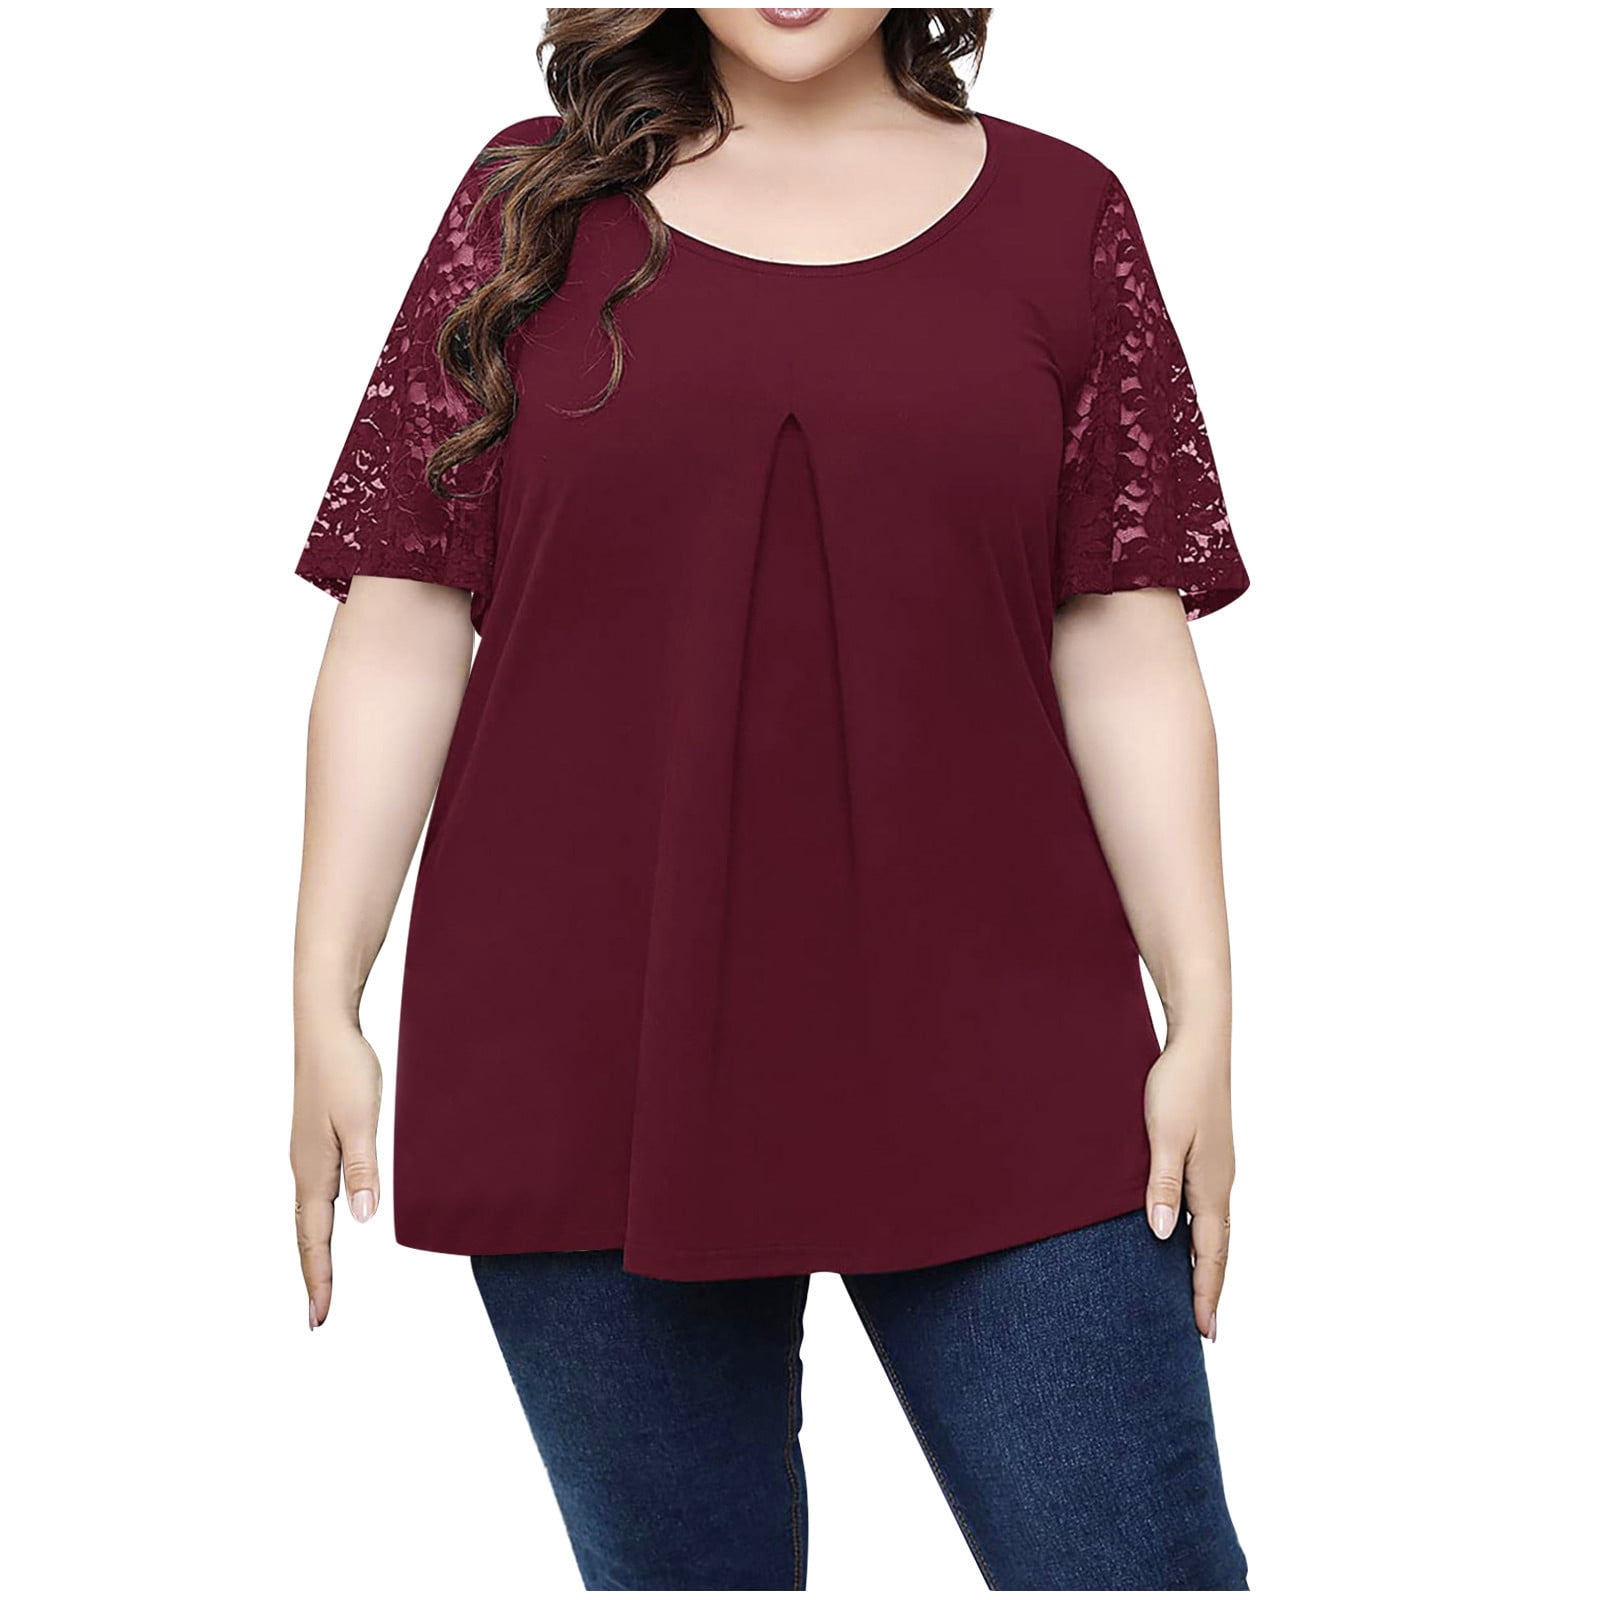 Zodggu Sales Womens Plus Blouse Shirts Big Size Fashion Ladies Tops Loose  Casual Short Sleeve Hollow Lace Stitch Solid Color Summer Trendy Female